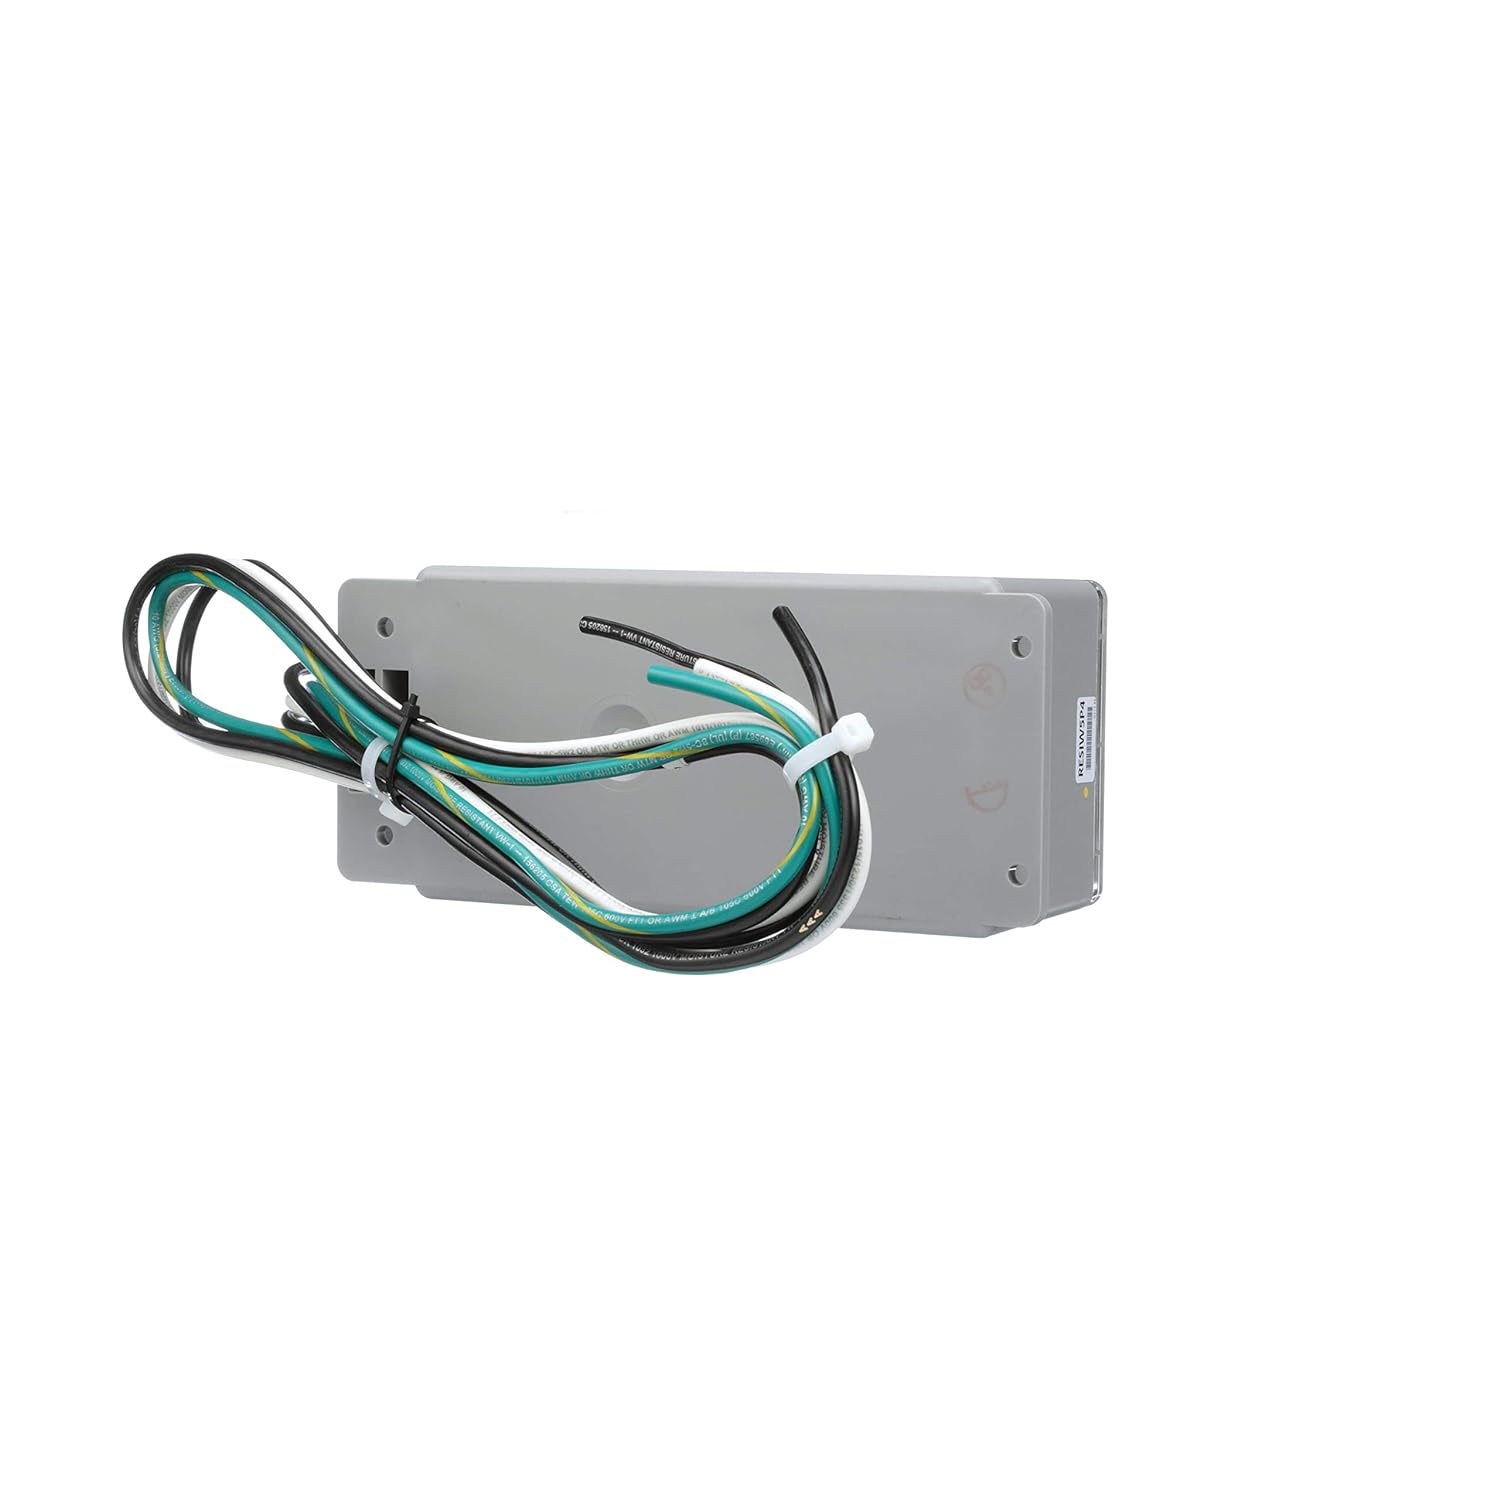 Siemens FS140 FirstSurge Type 2 Surge Protection Device